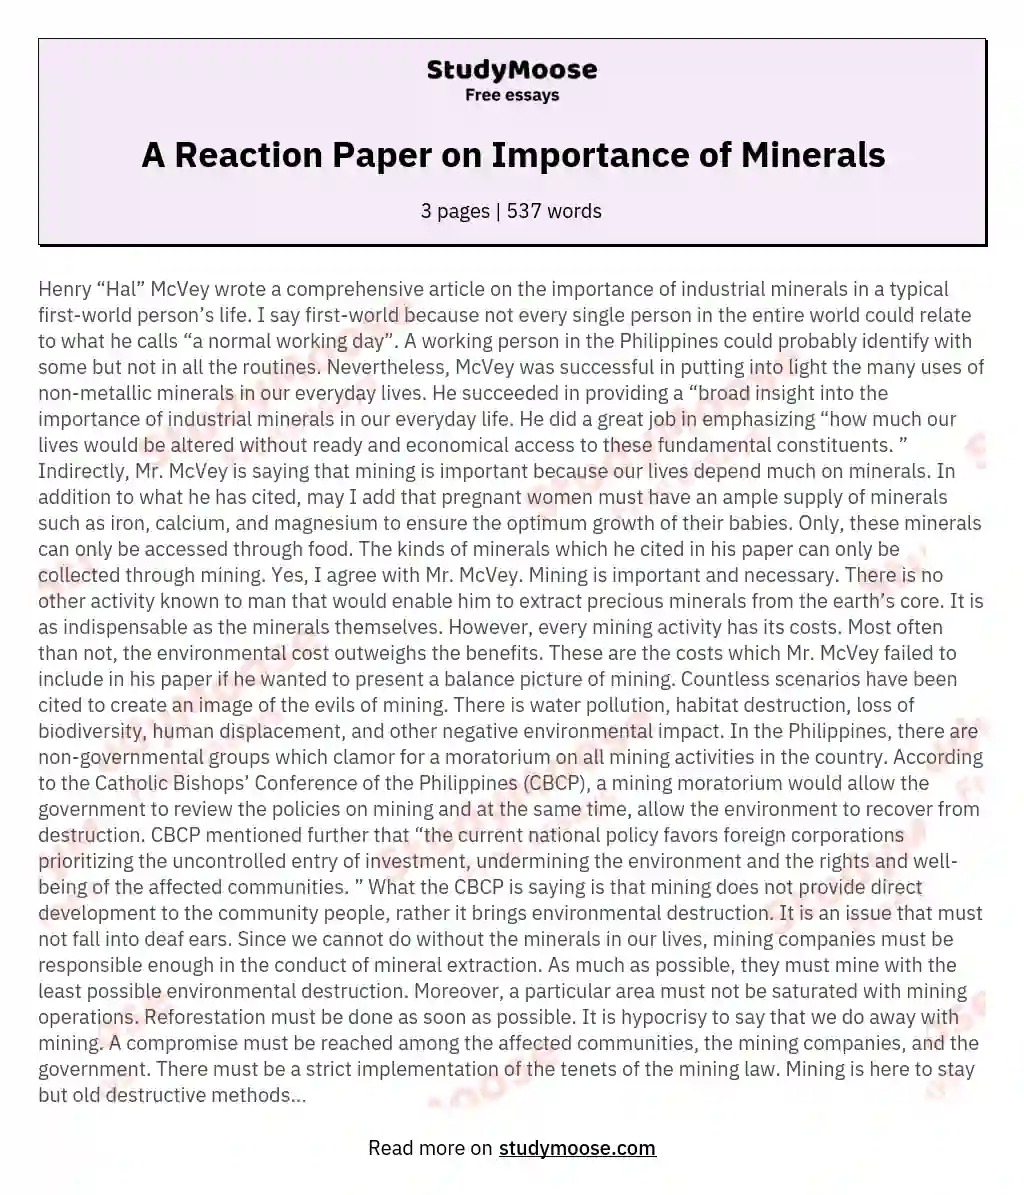 A Reaction Paper on Importance of Minerals essay